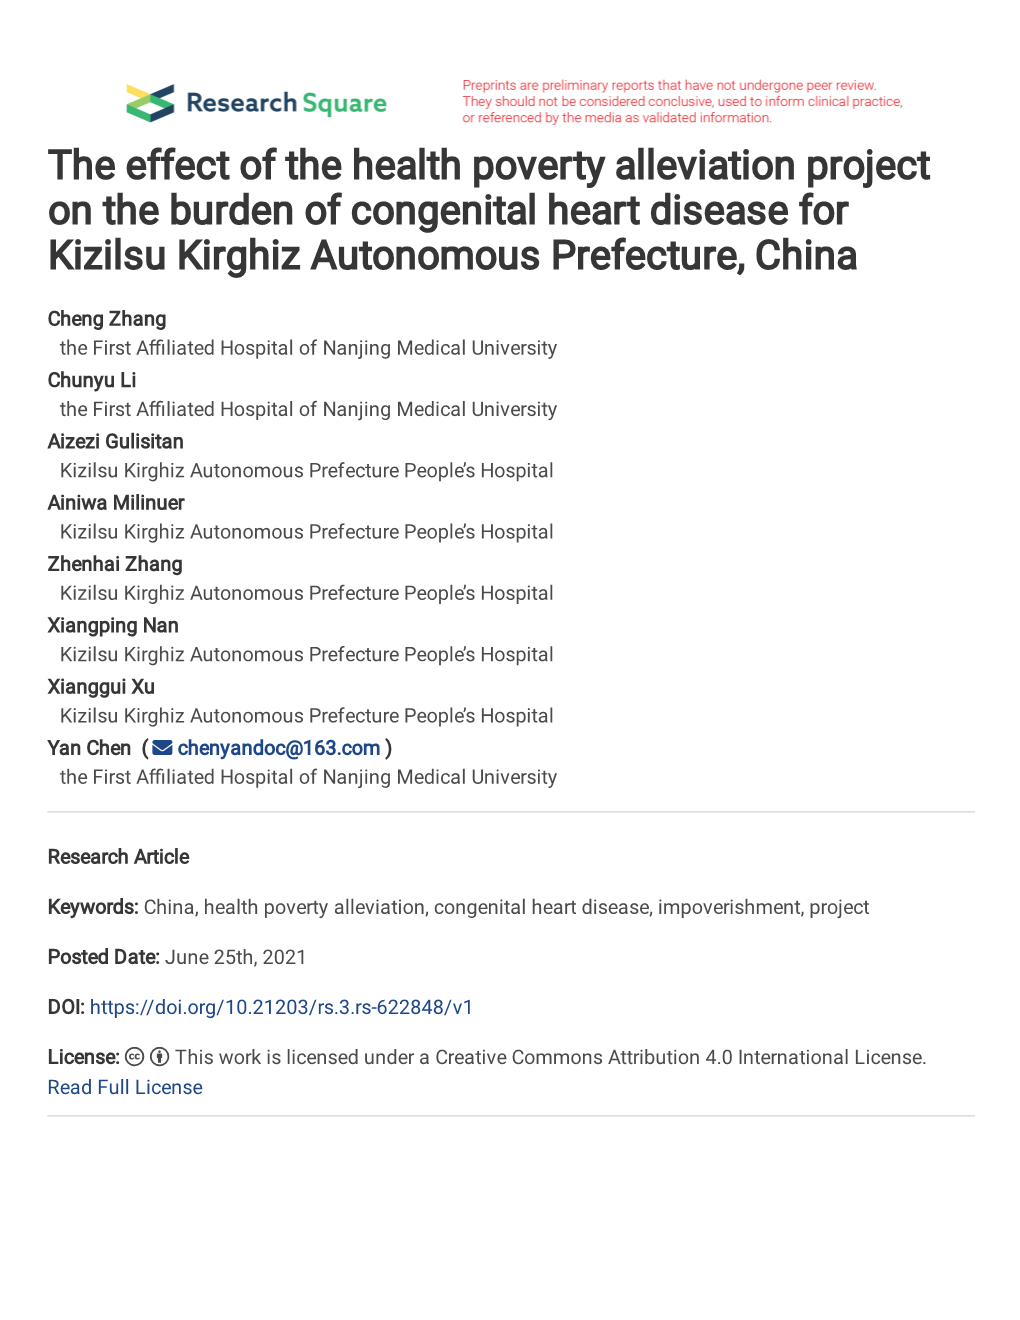 The Effect of the Health Poverty Alleviation Project on the Burden of Congenital Heart Disease for Kizilsu Kirghiz Autonomous Prefecture, China